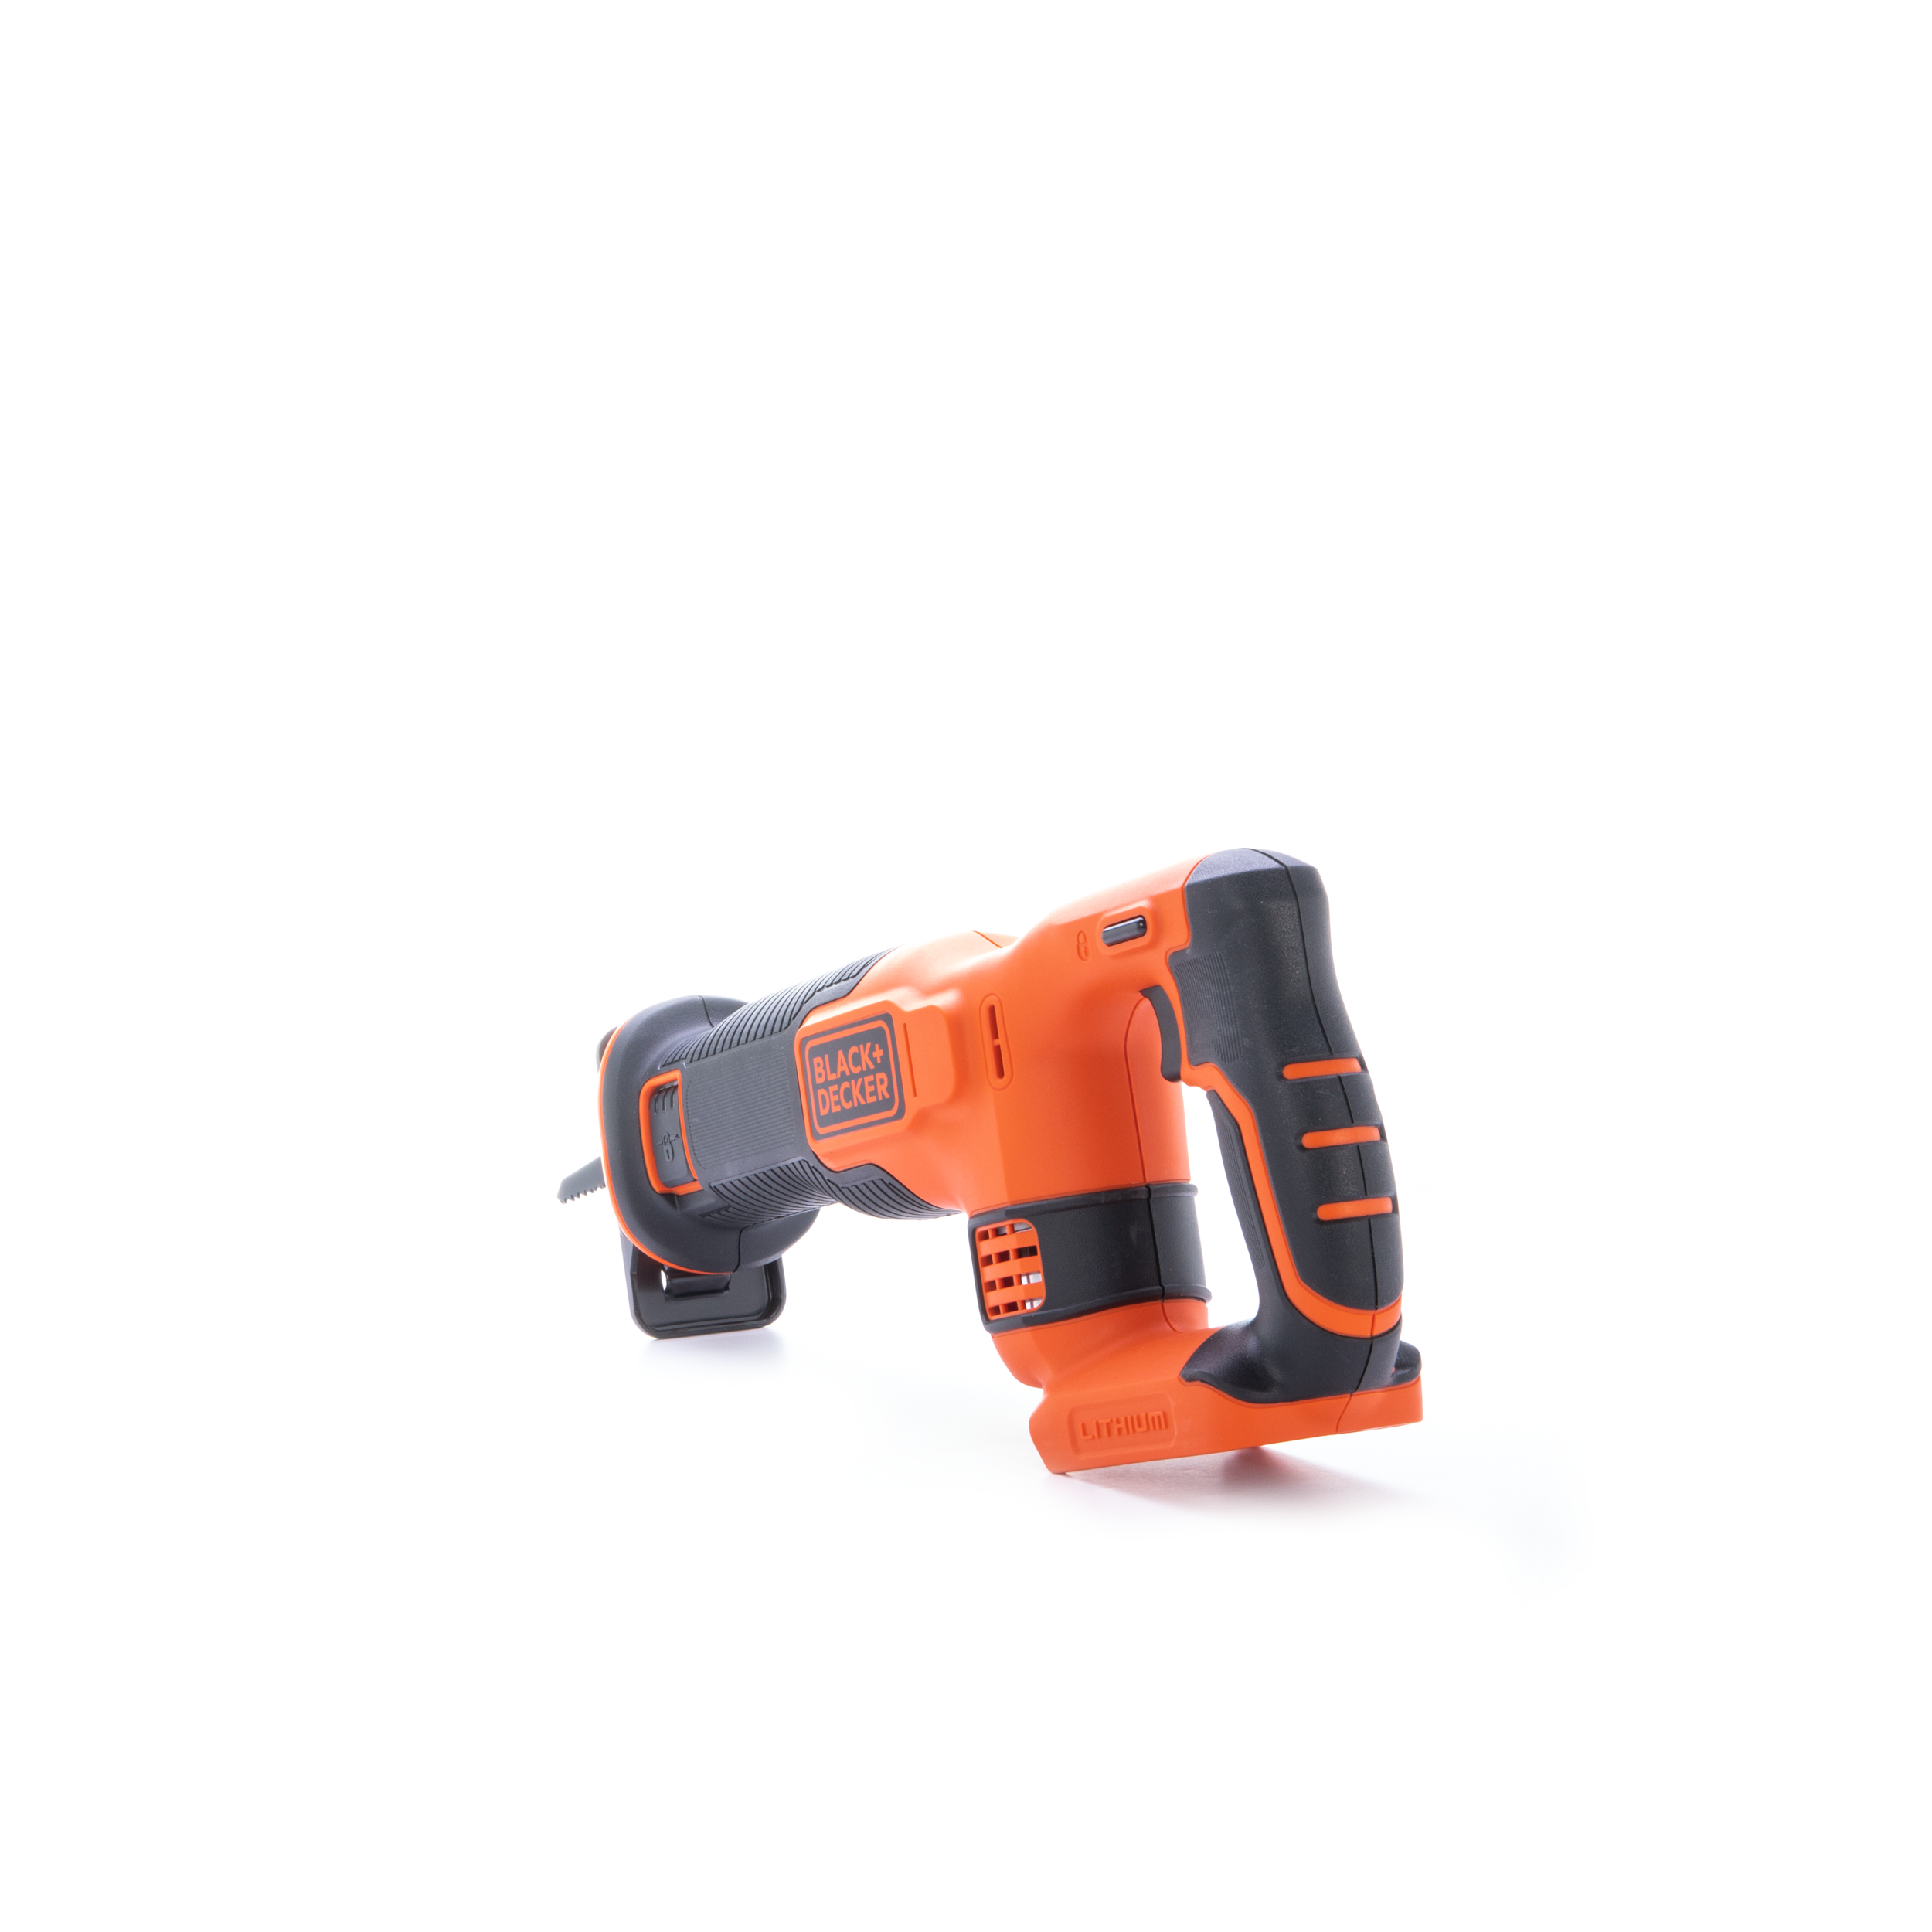 Black+Decker 20V Max Lithium Reciprocating Saw - Battery and Charger Not  Included #BDCR20B (1/Pkg.)